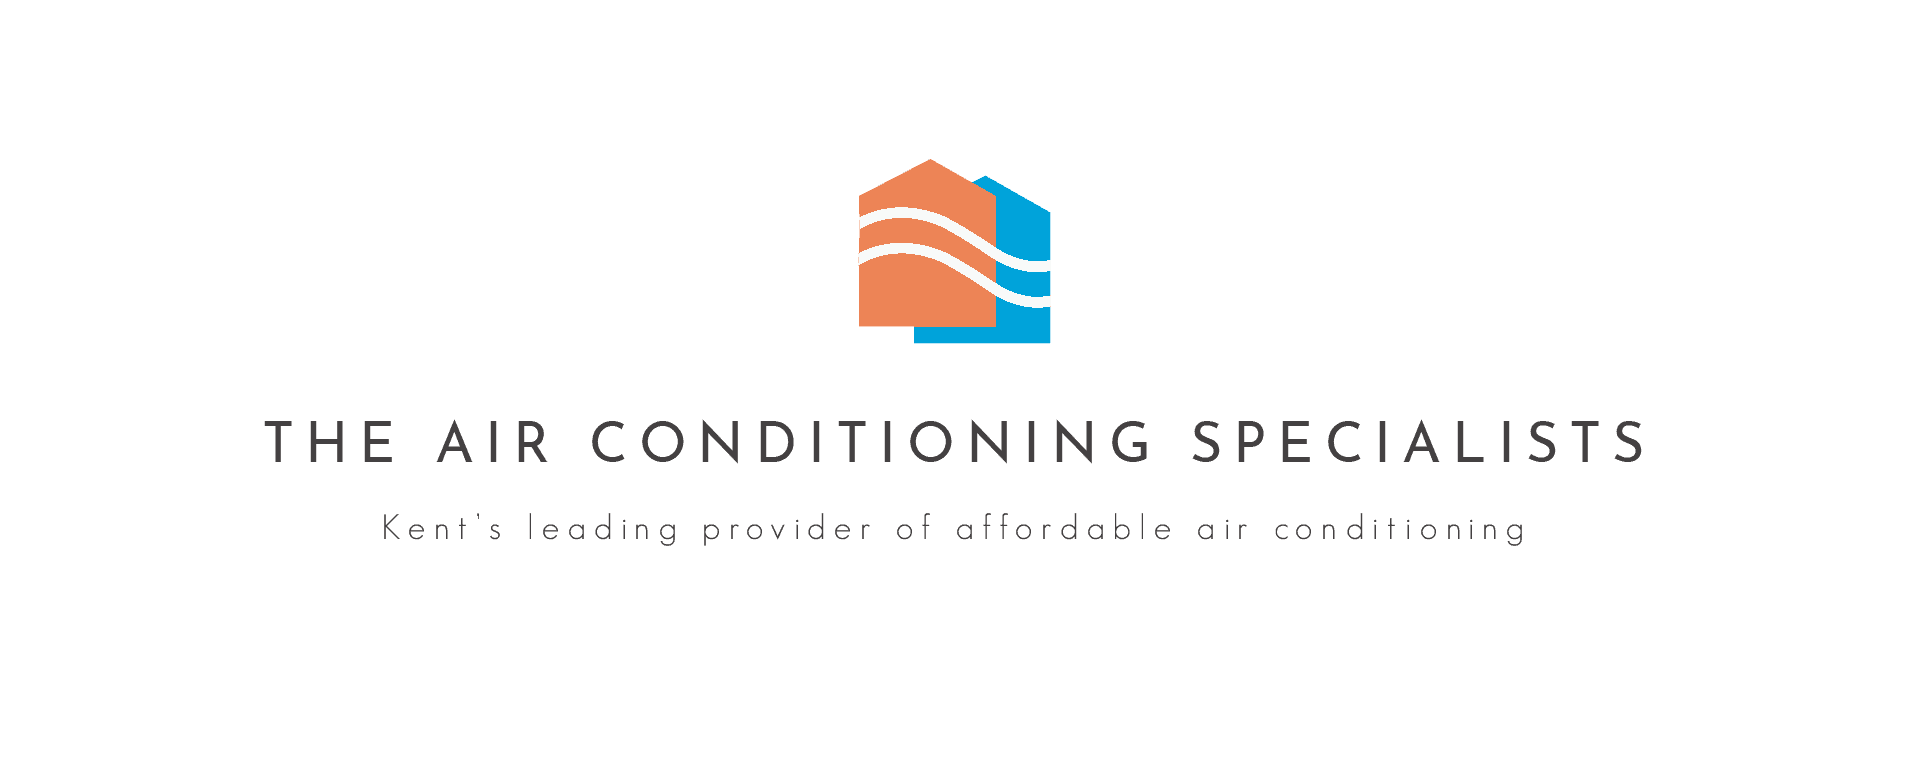 Contact Air Conditioning in West Malling Contact